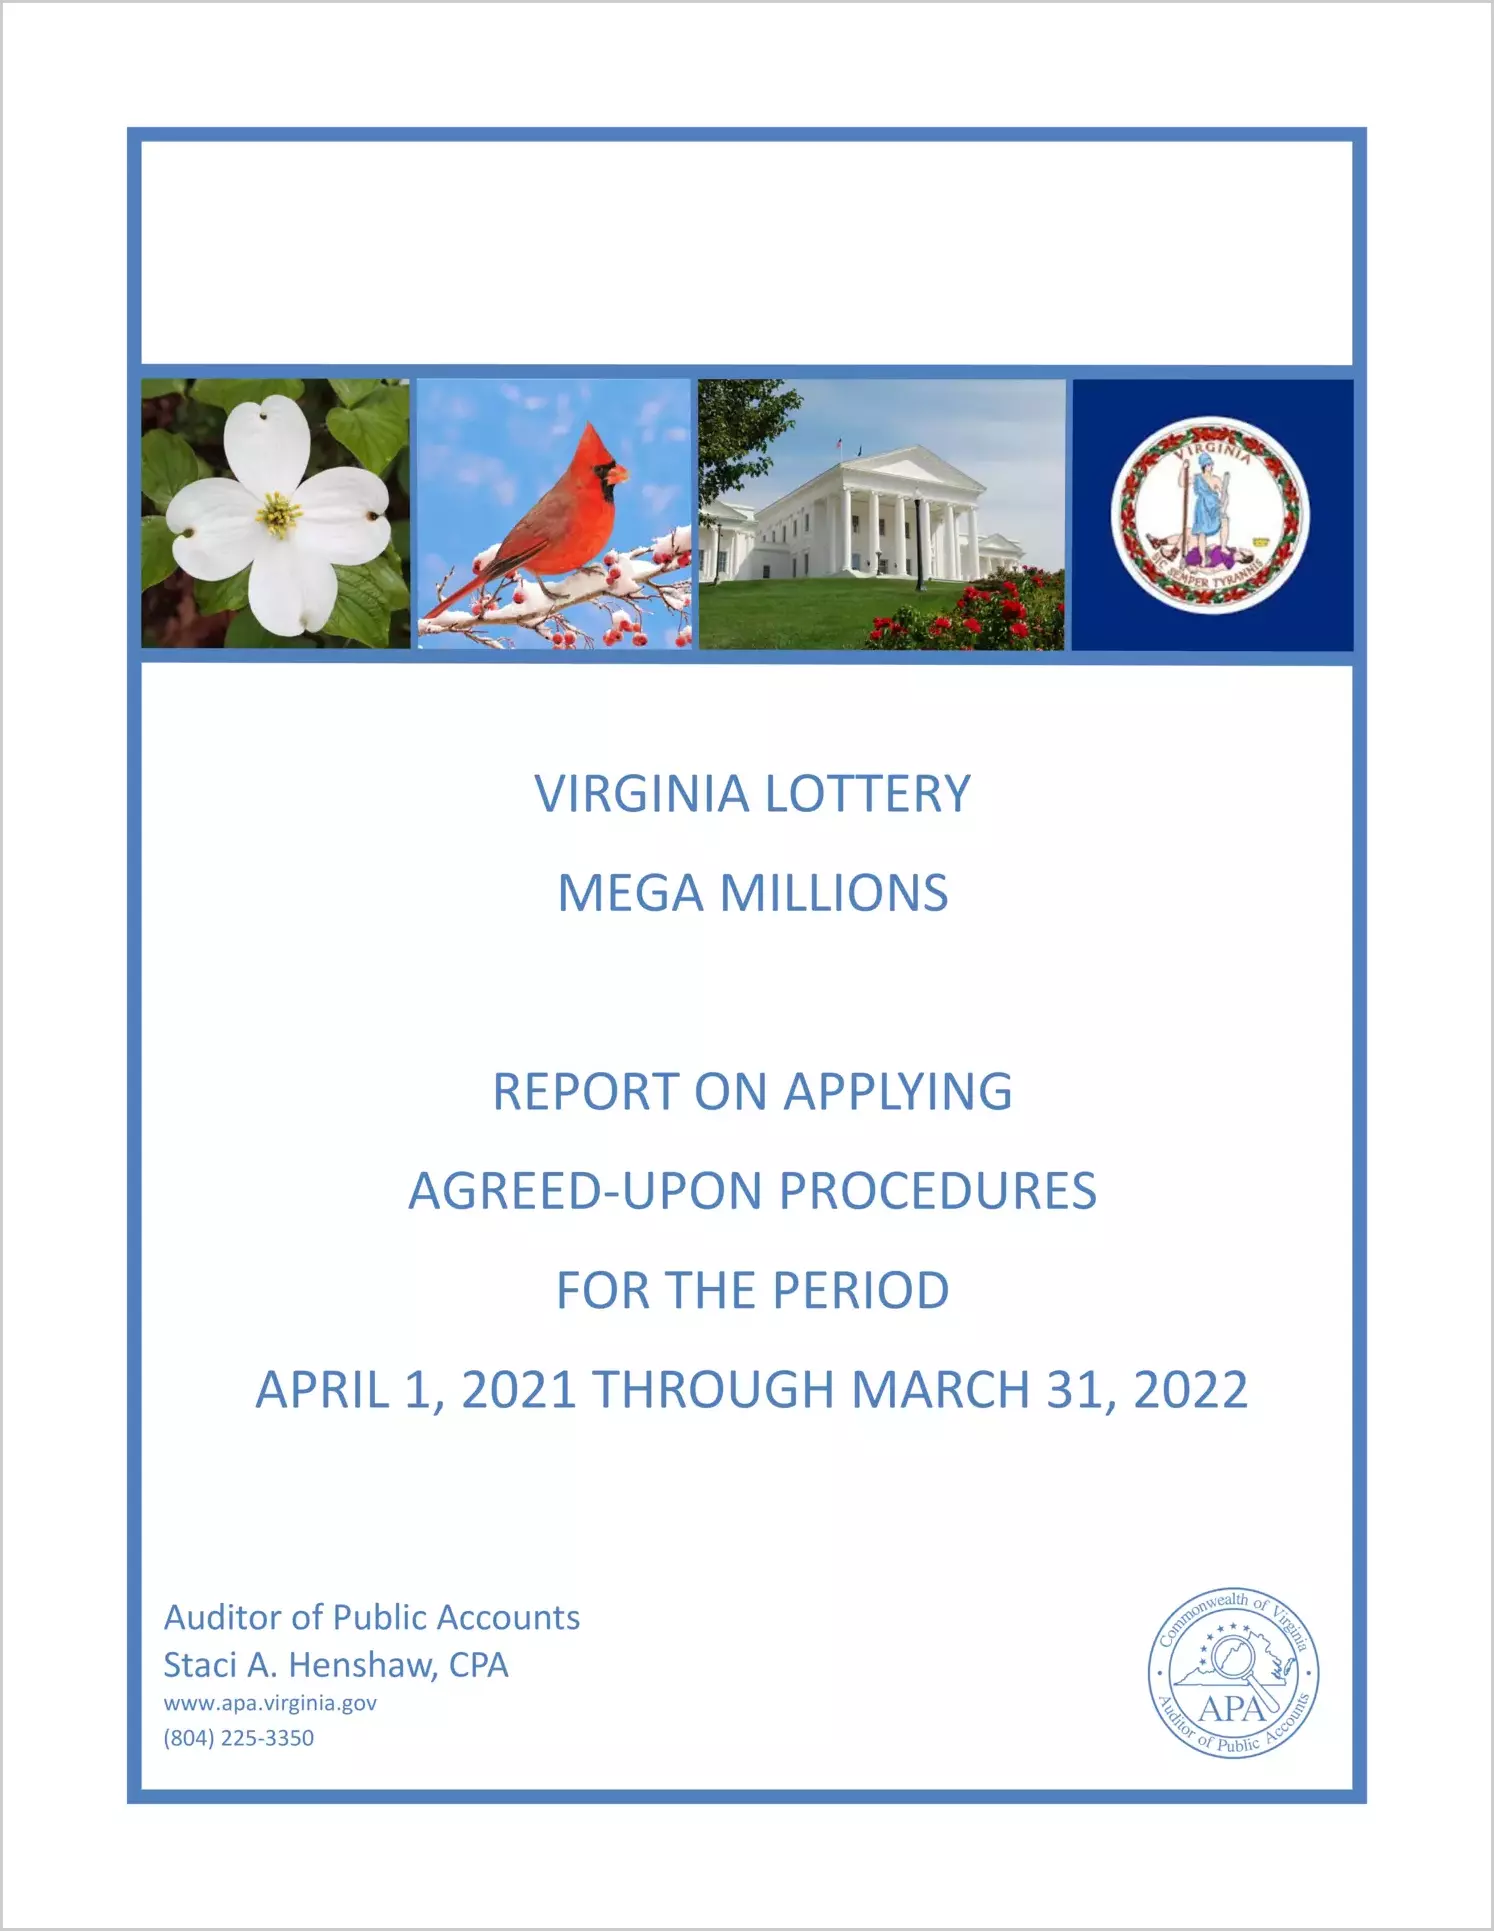 Virginia Lottery Mega Millions Report on Applying Agreed-Upon Procedures for the period April 1, 2021 through March 31, 2022